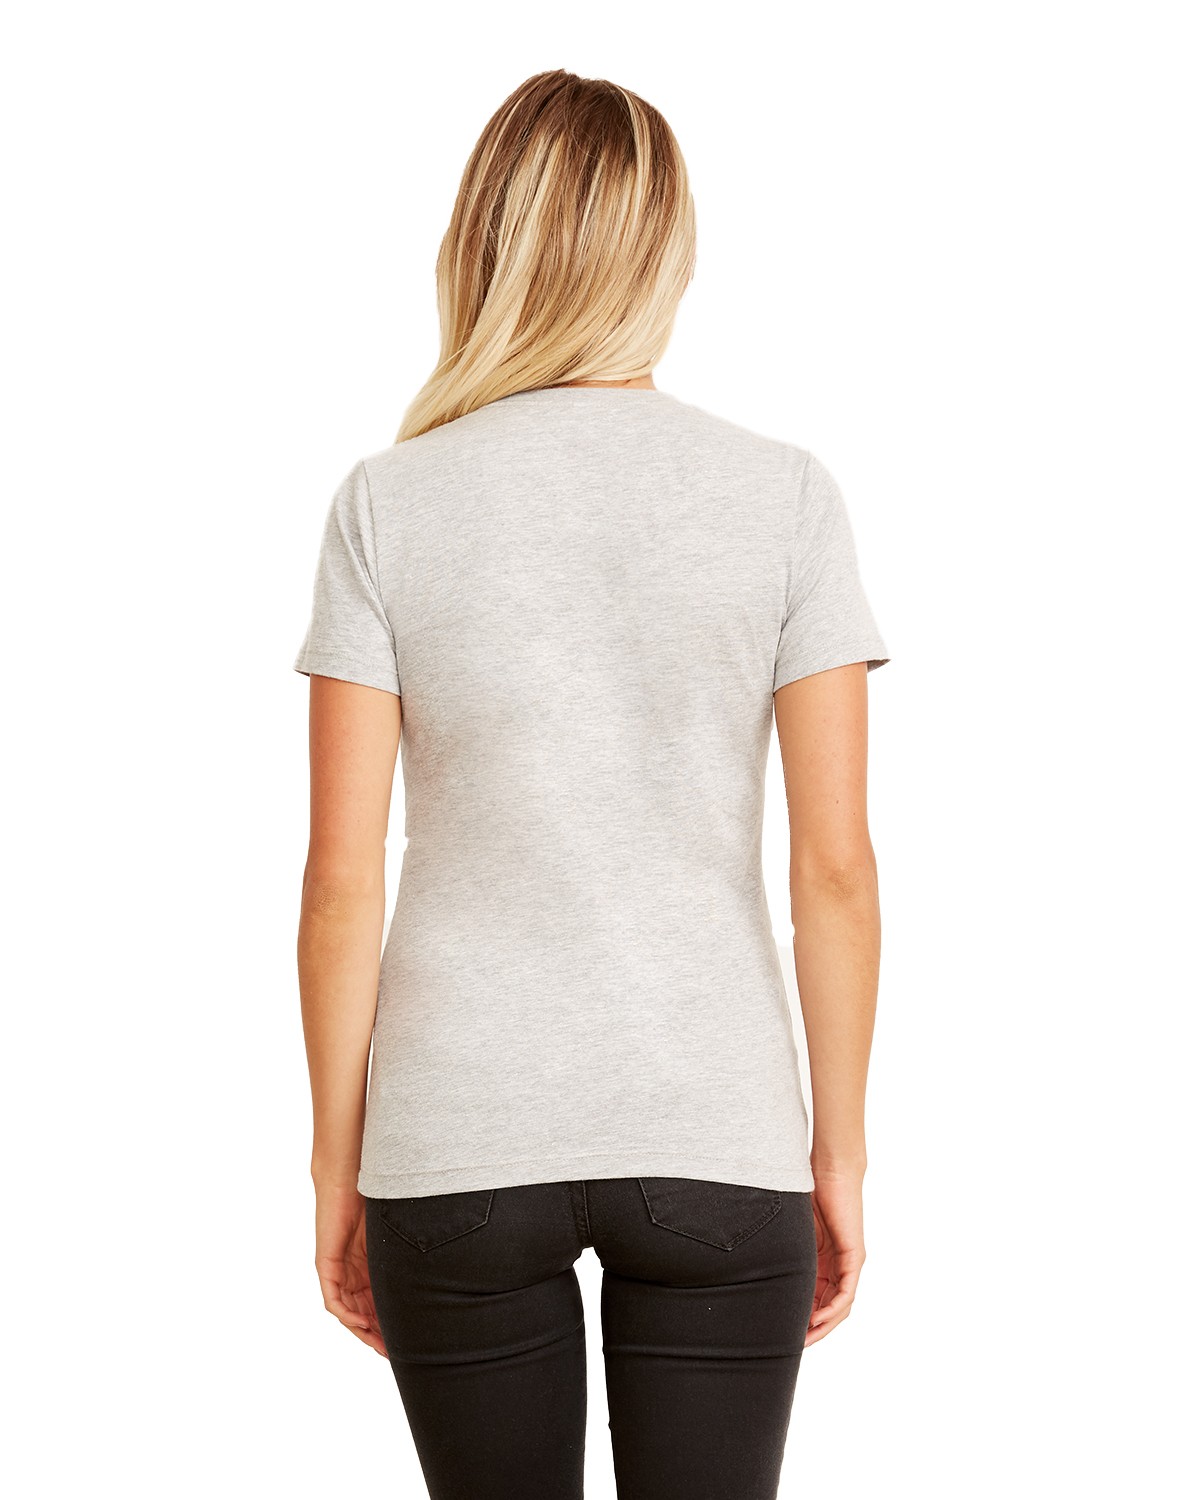 Womens t shirts made in usa